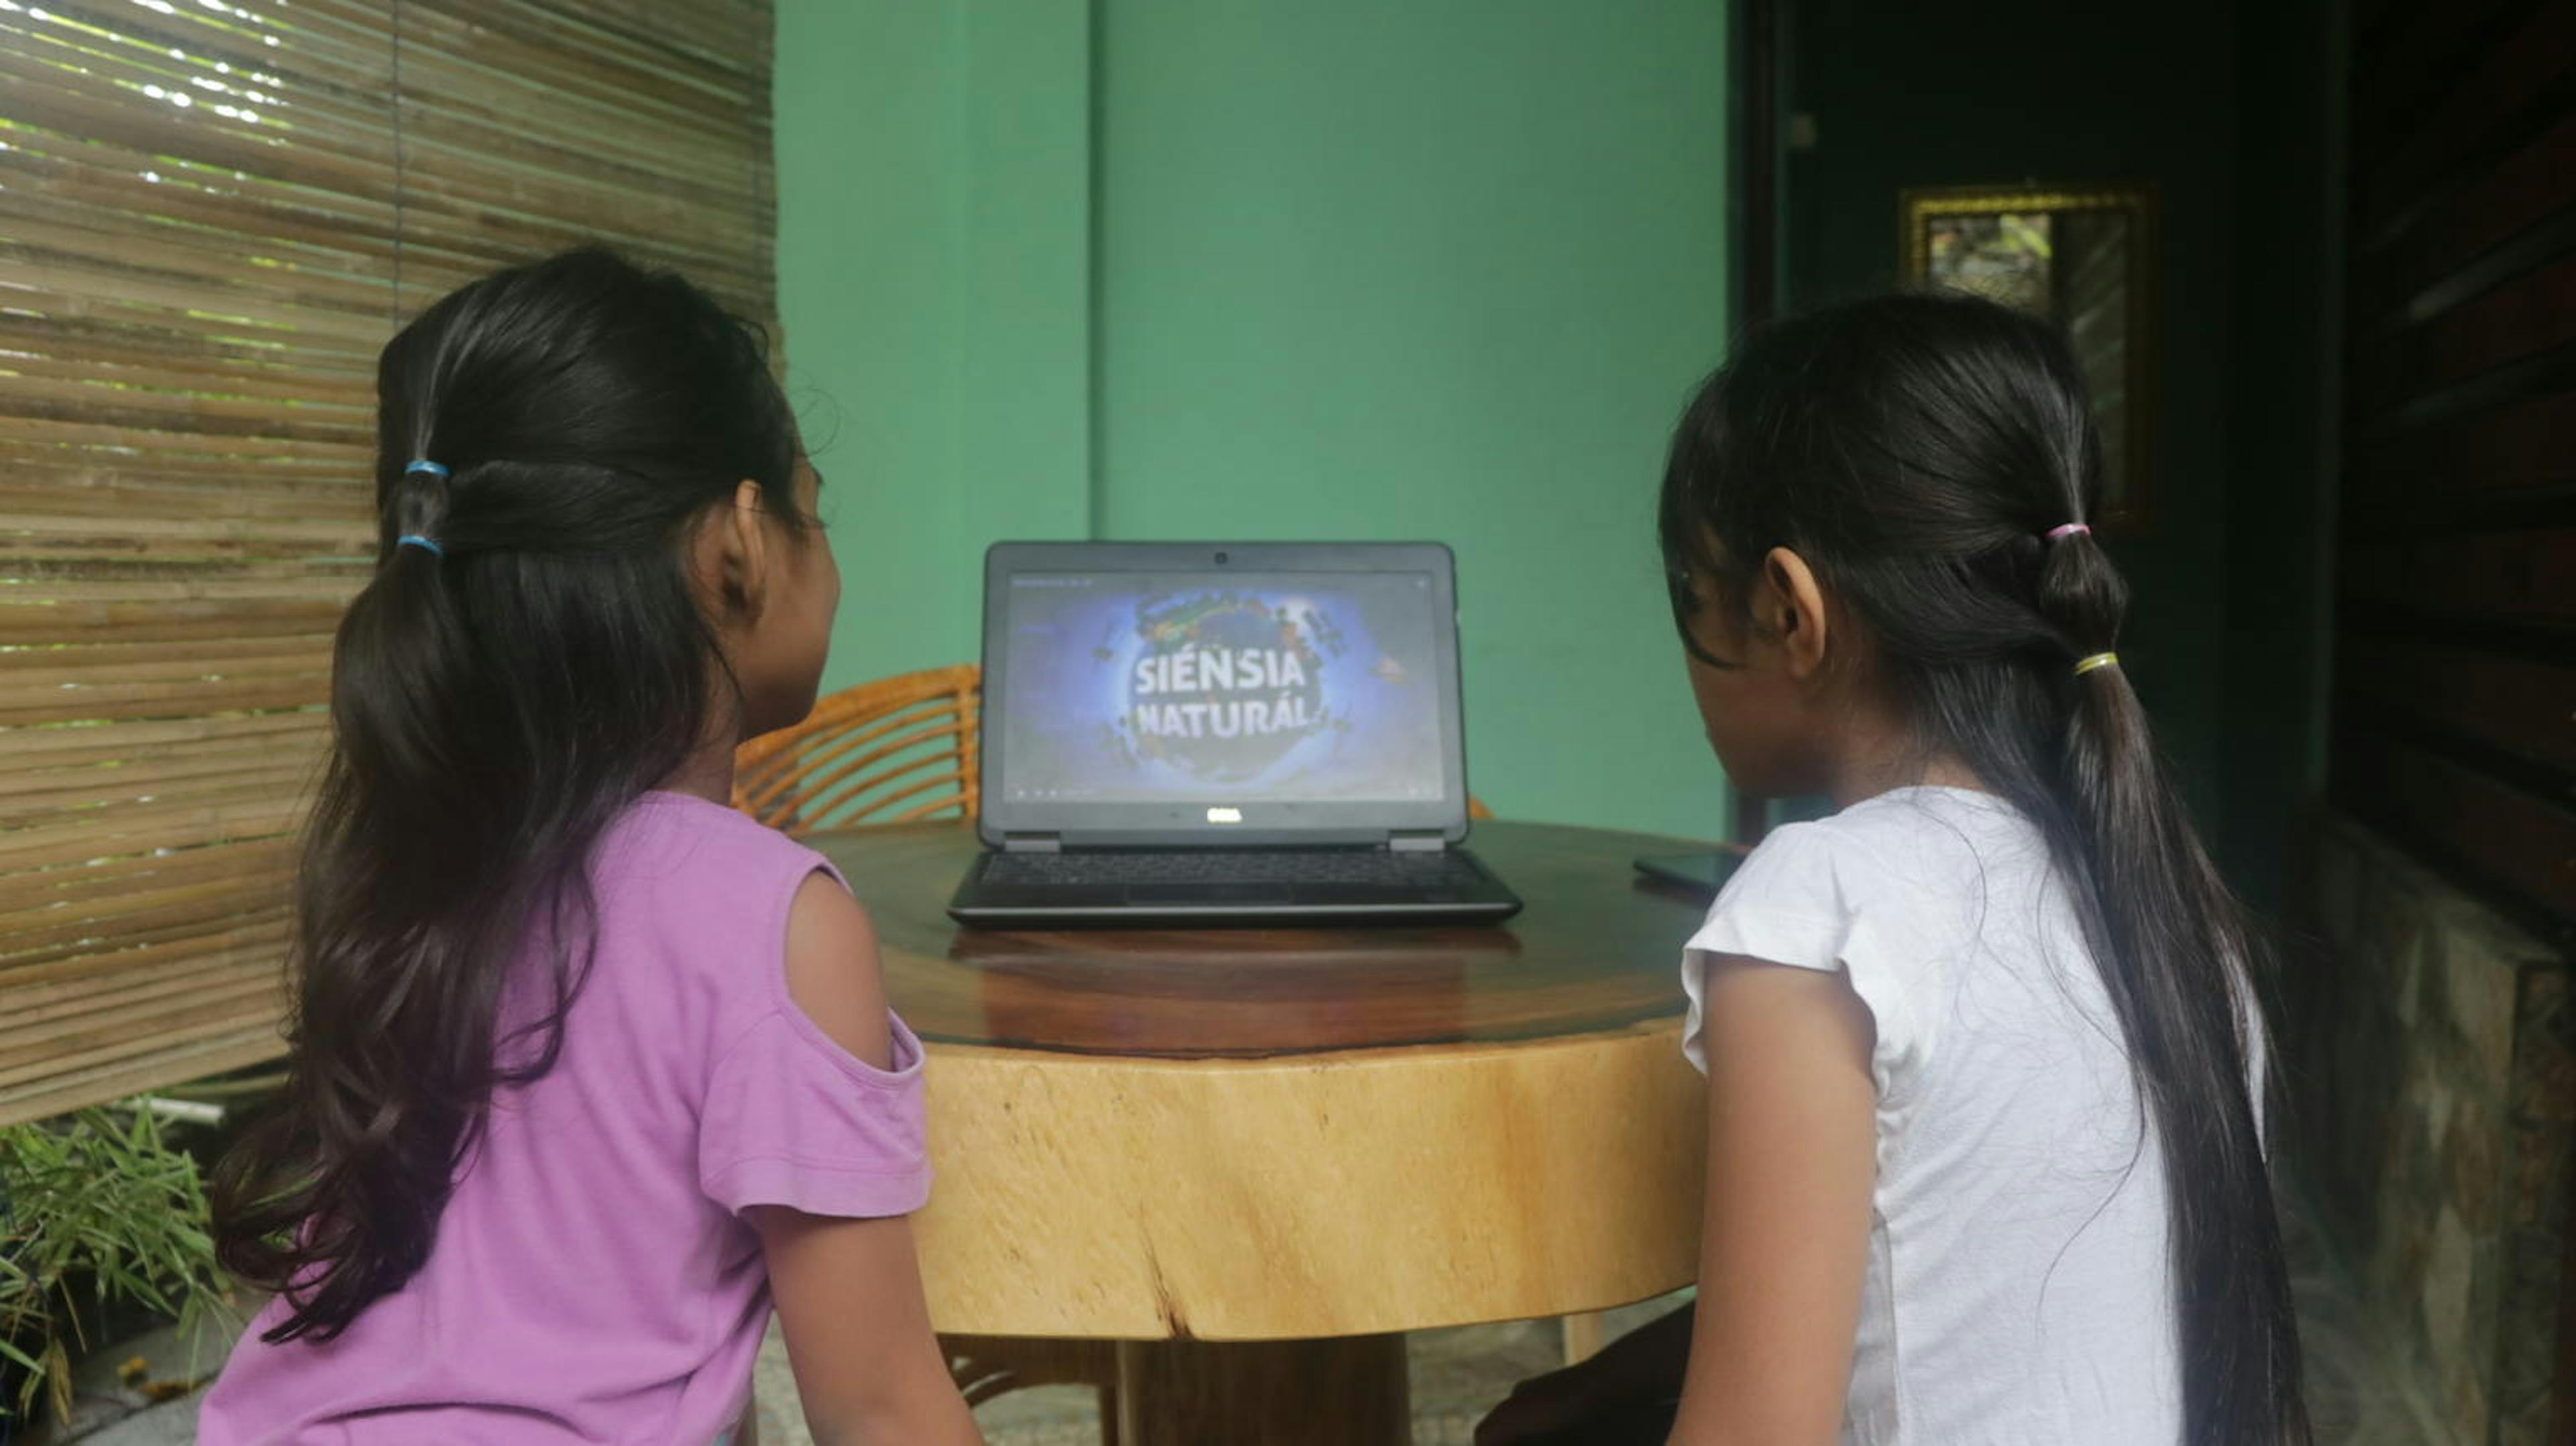 Two girls view the learning platform where they can view a mix of digital learning resources including audio and Visal material.